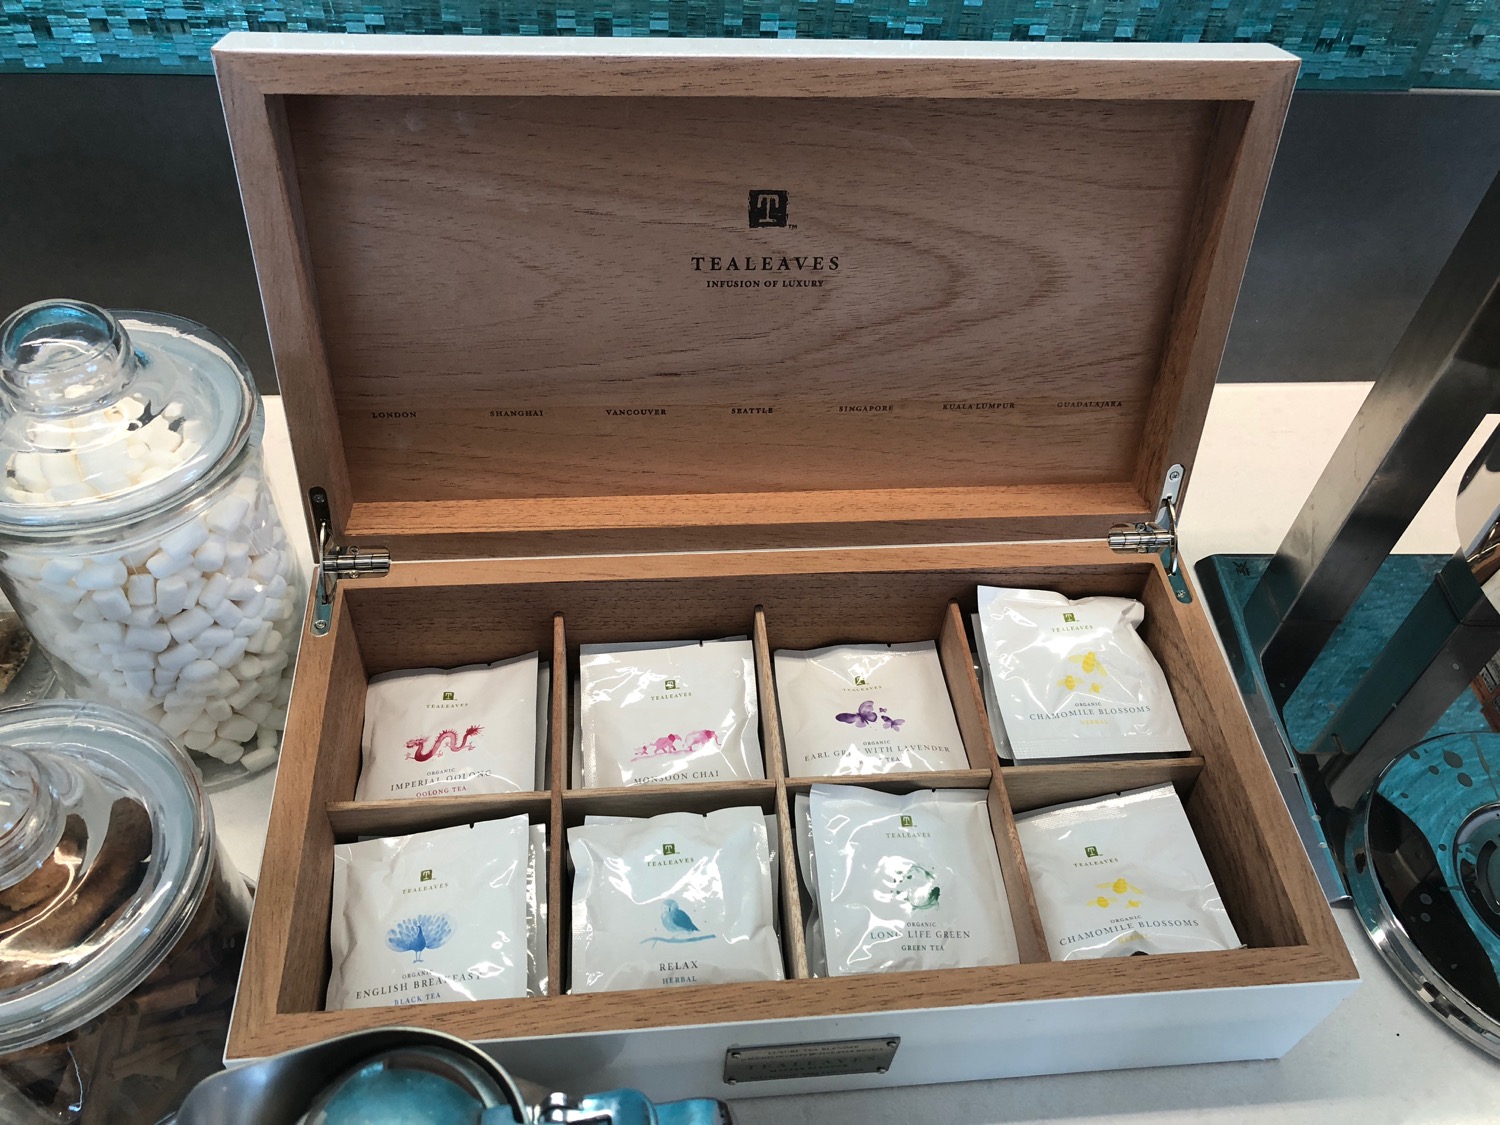 a wooden box with tea bags in it